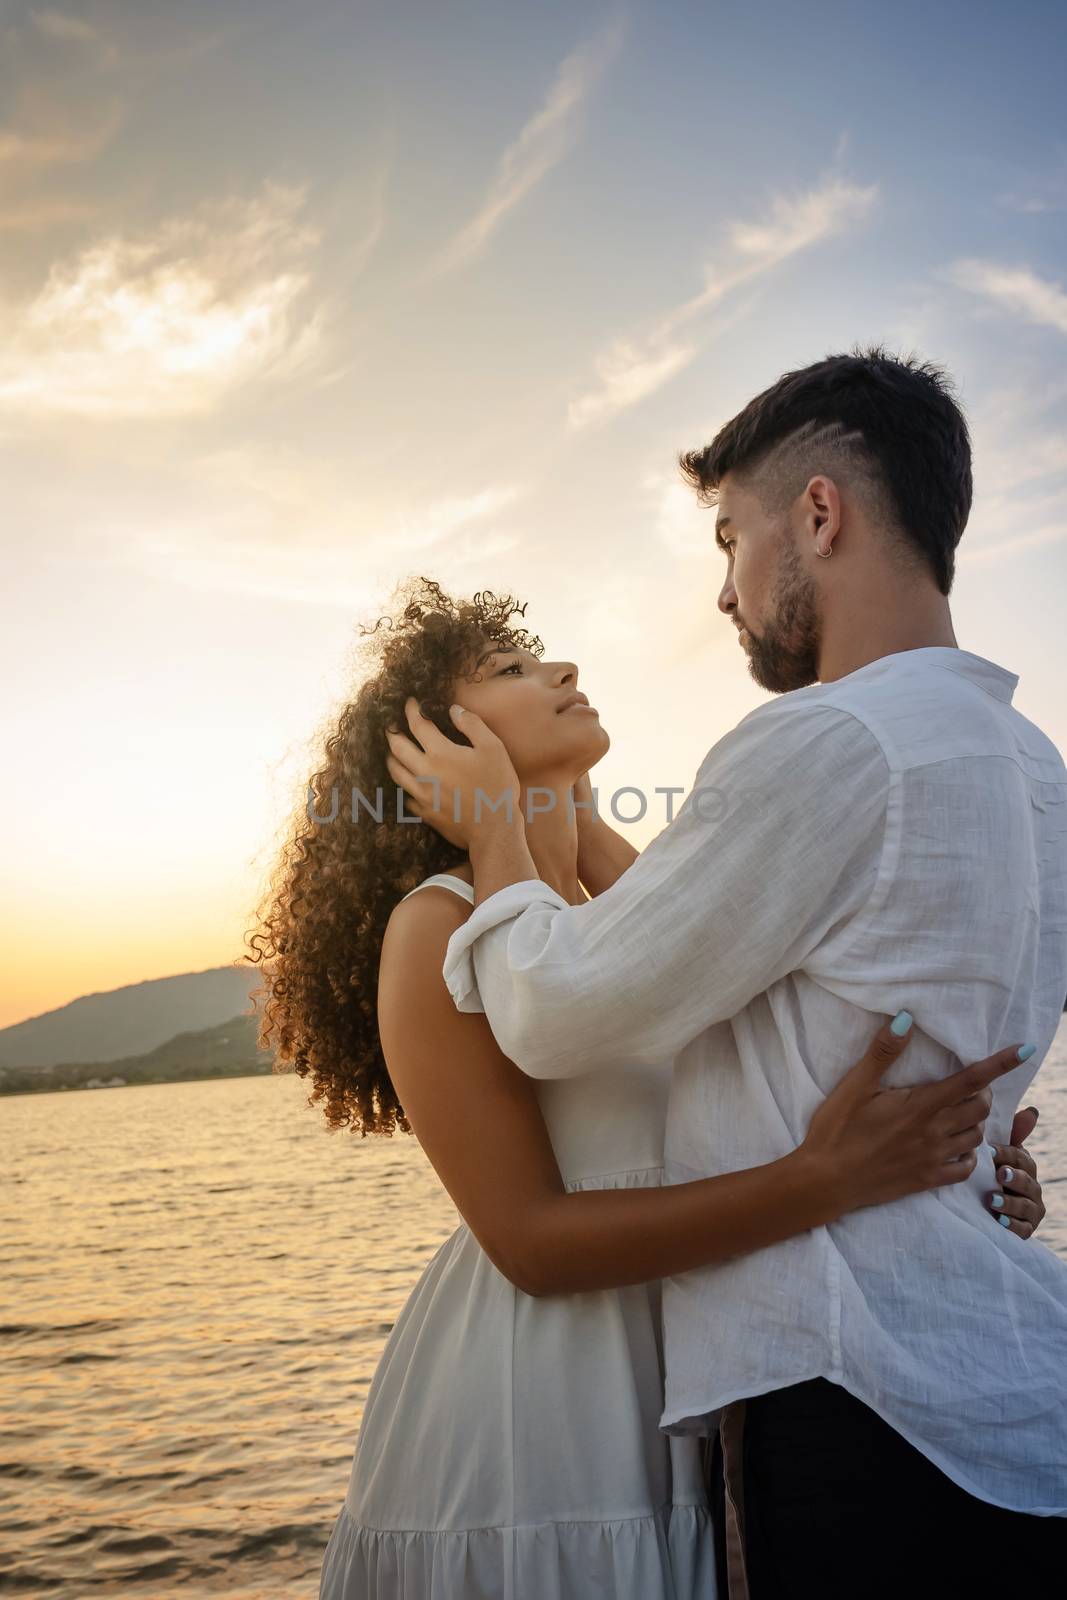 Young attractive caucasian bearded man with modern haircut holds his black Hispanic girlfriend's head in his hands looking into her eyes while she hugs him - Multiracial couple romance scene at sunset